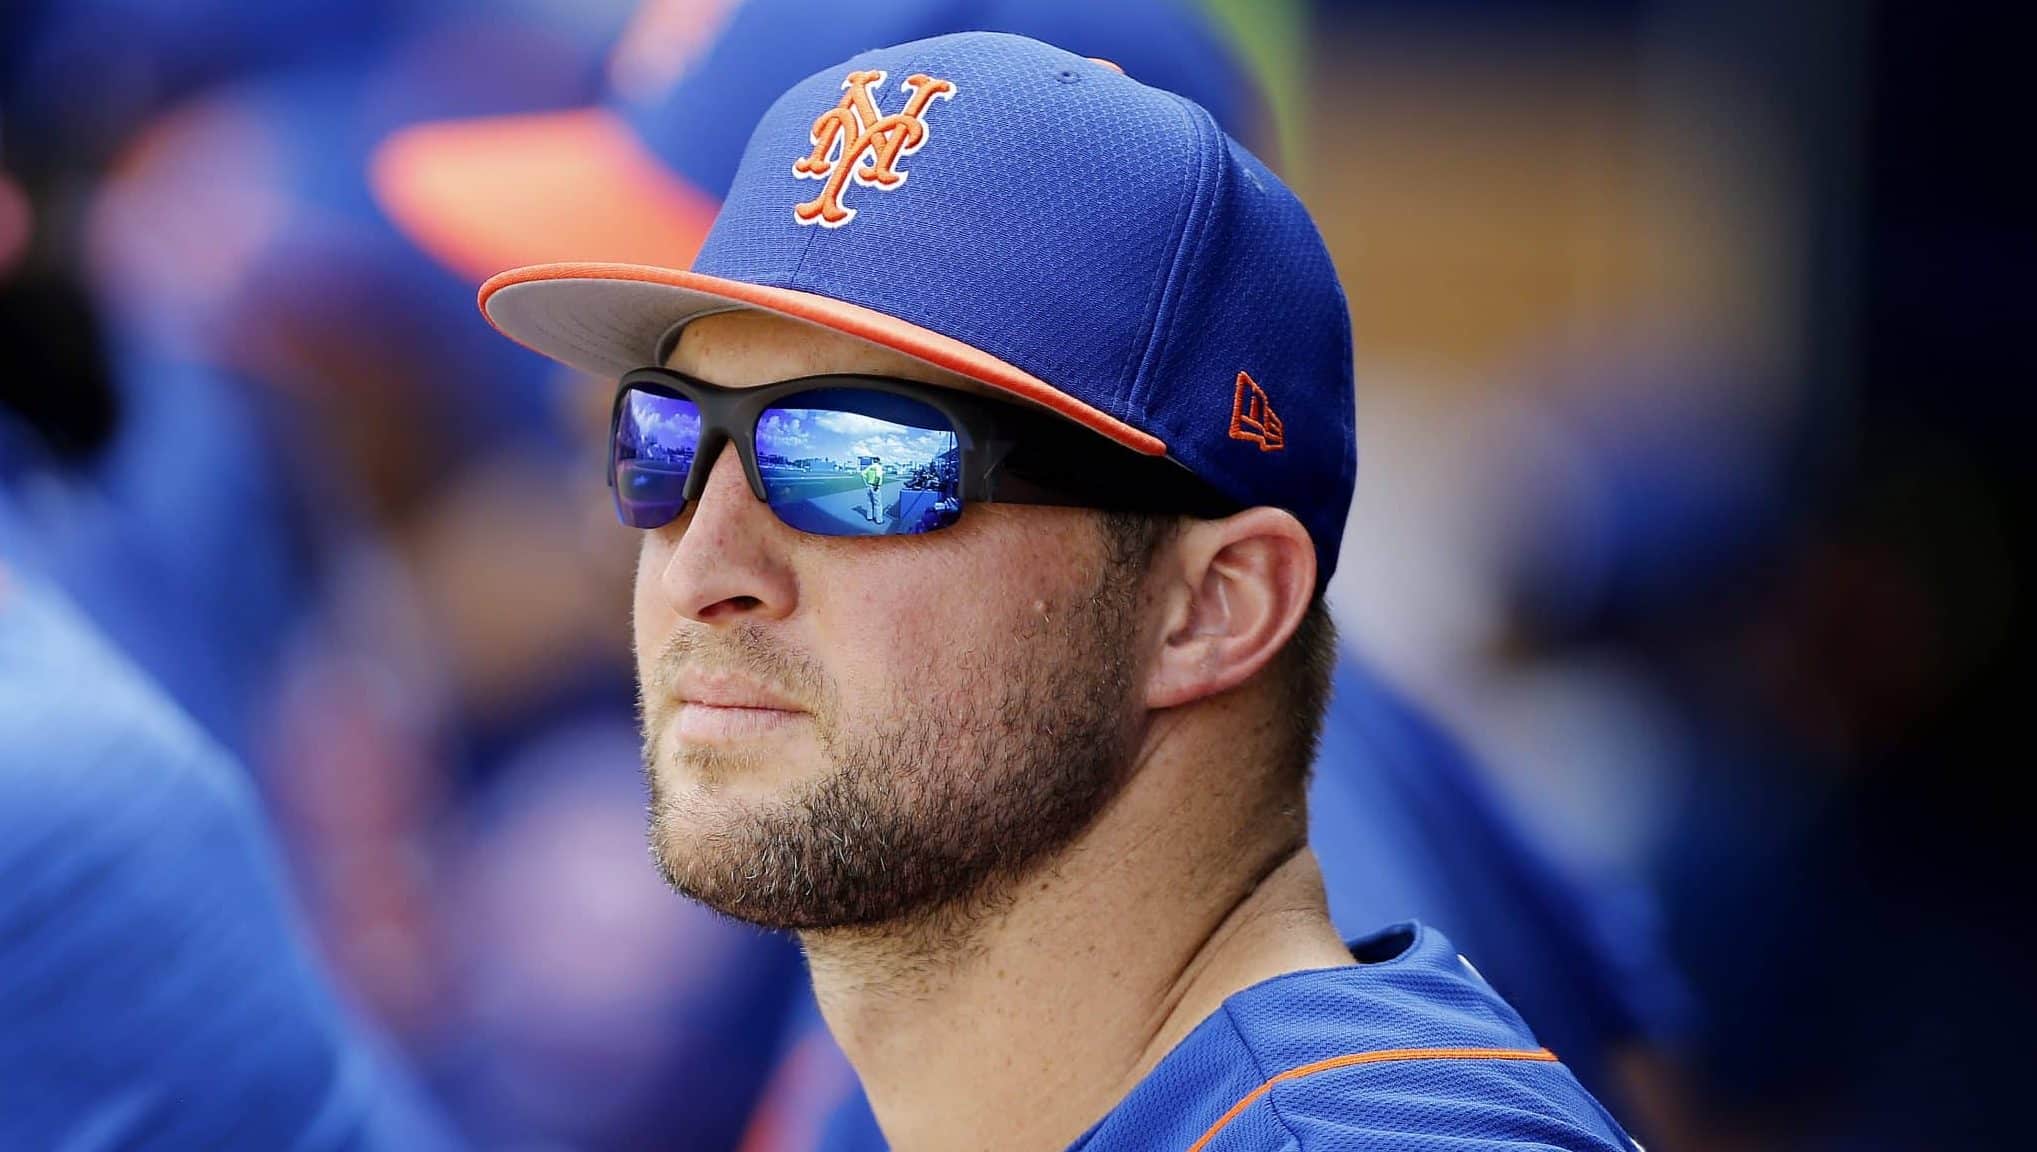 PORT ST. LUCIE, FLORIDA - FEBRUARY 23: Tim Tebow #15 of the New York Mets looks on in the dugout against the Atlanta Braves during the Grapefruit League spring training game at First Data Field on February 23, 2019 in Port St. Lucie, Florida.